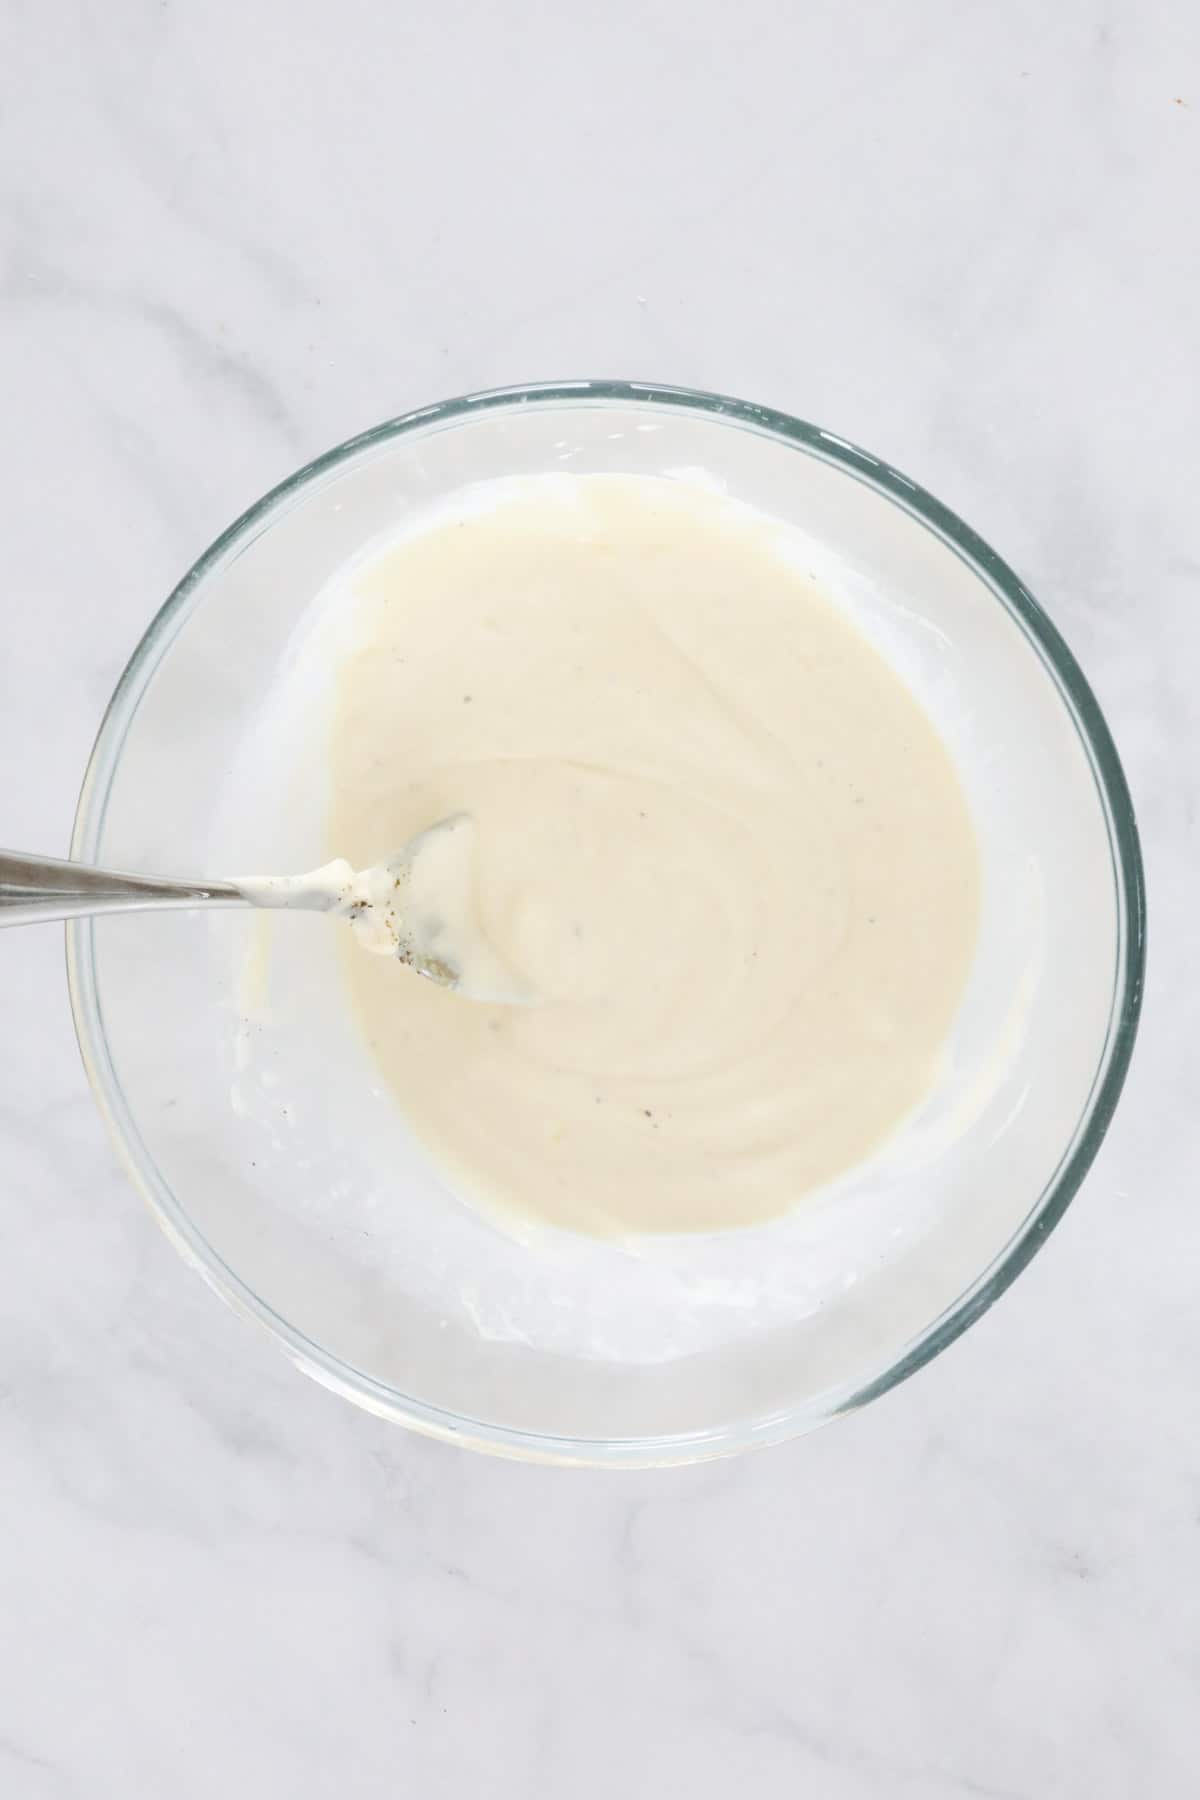 The mixed creamy mayo dressing in the mixing bowl.